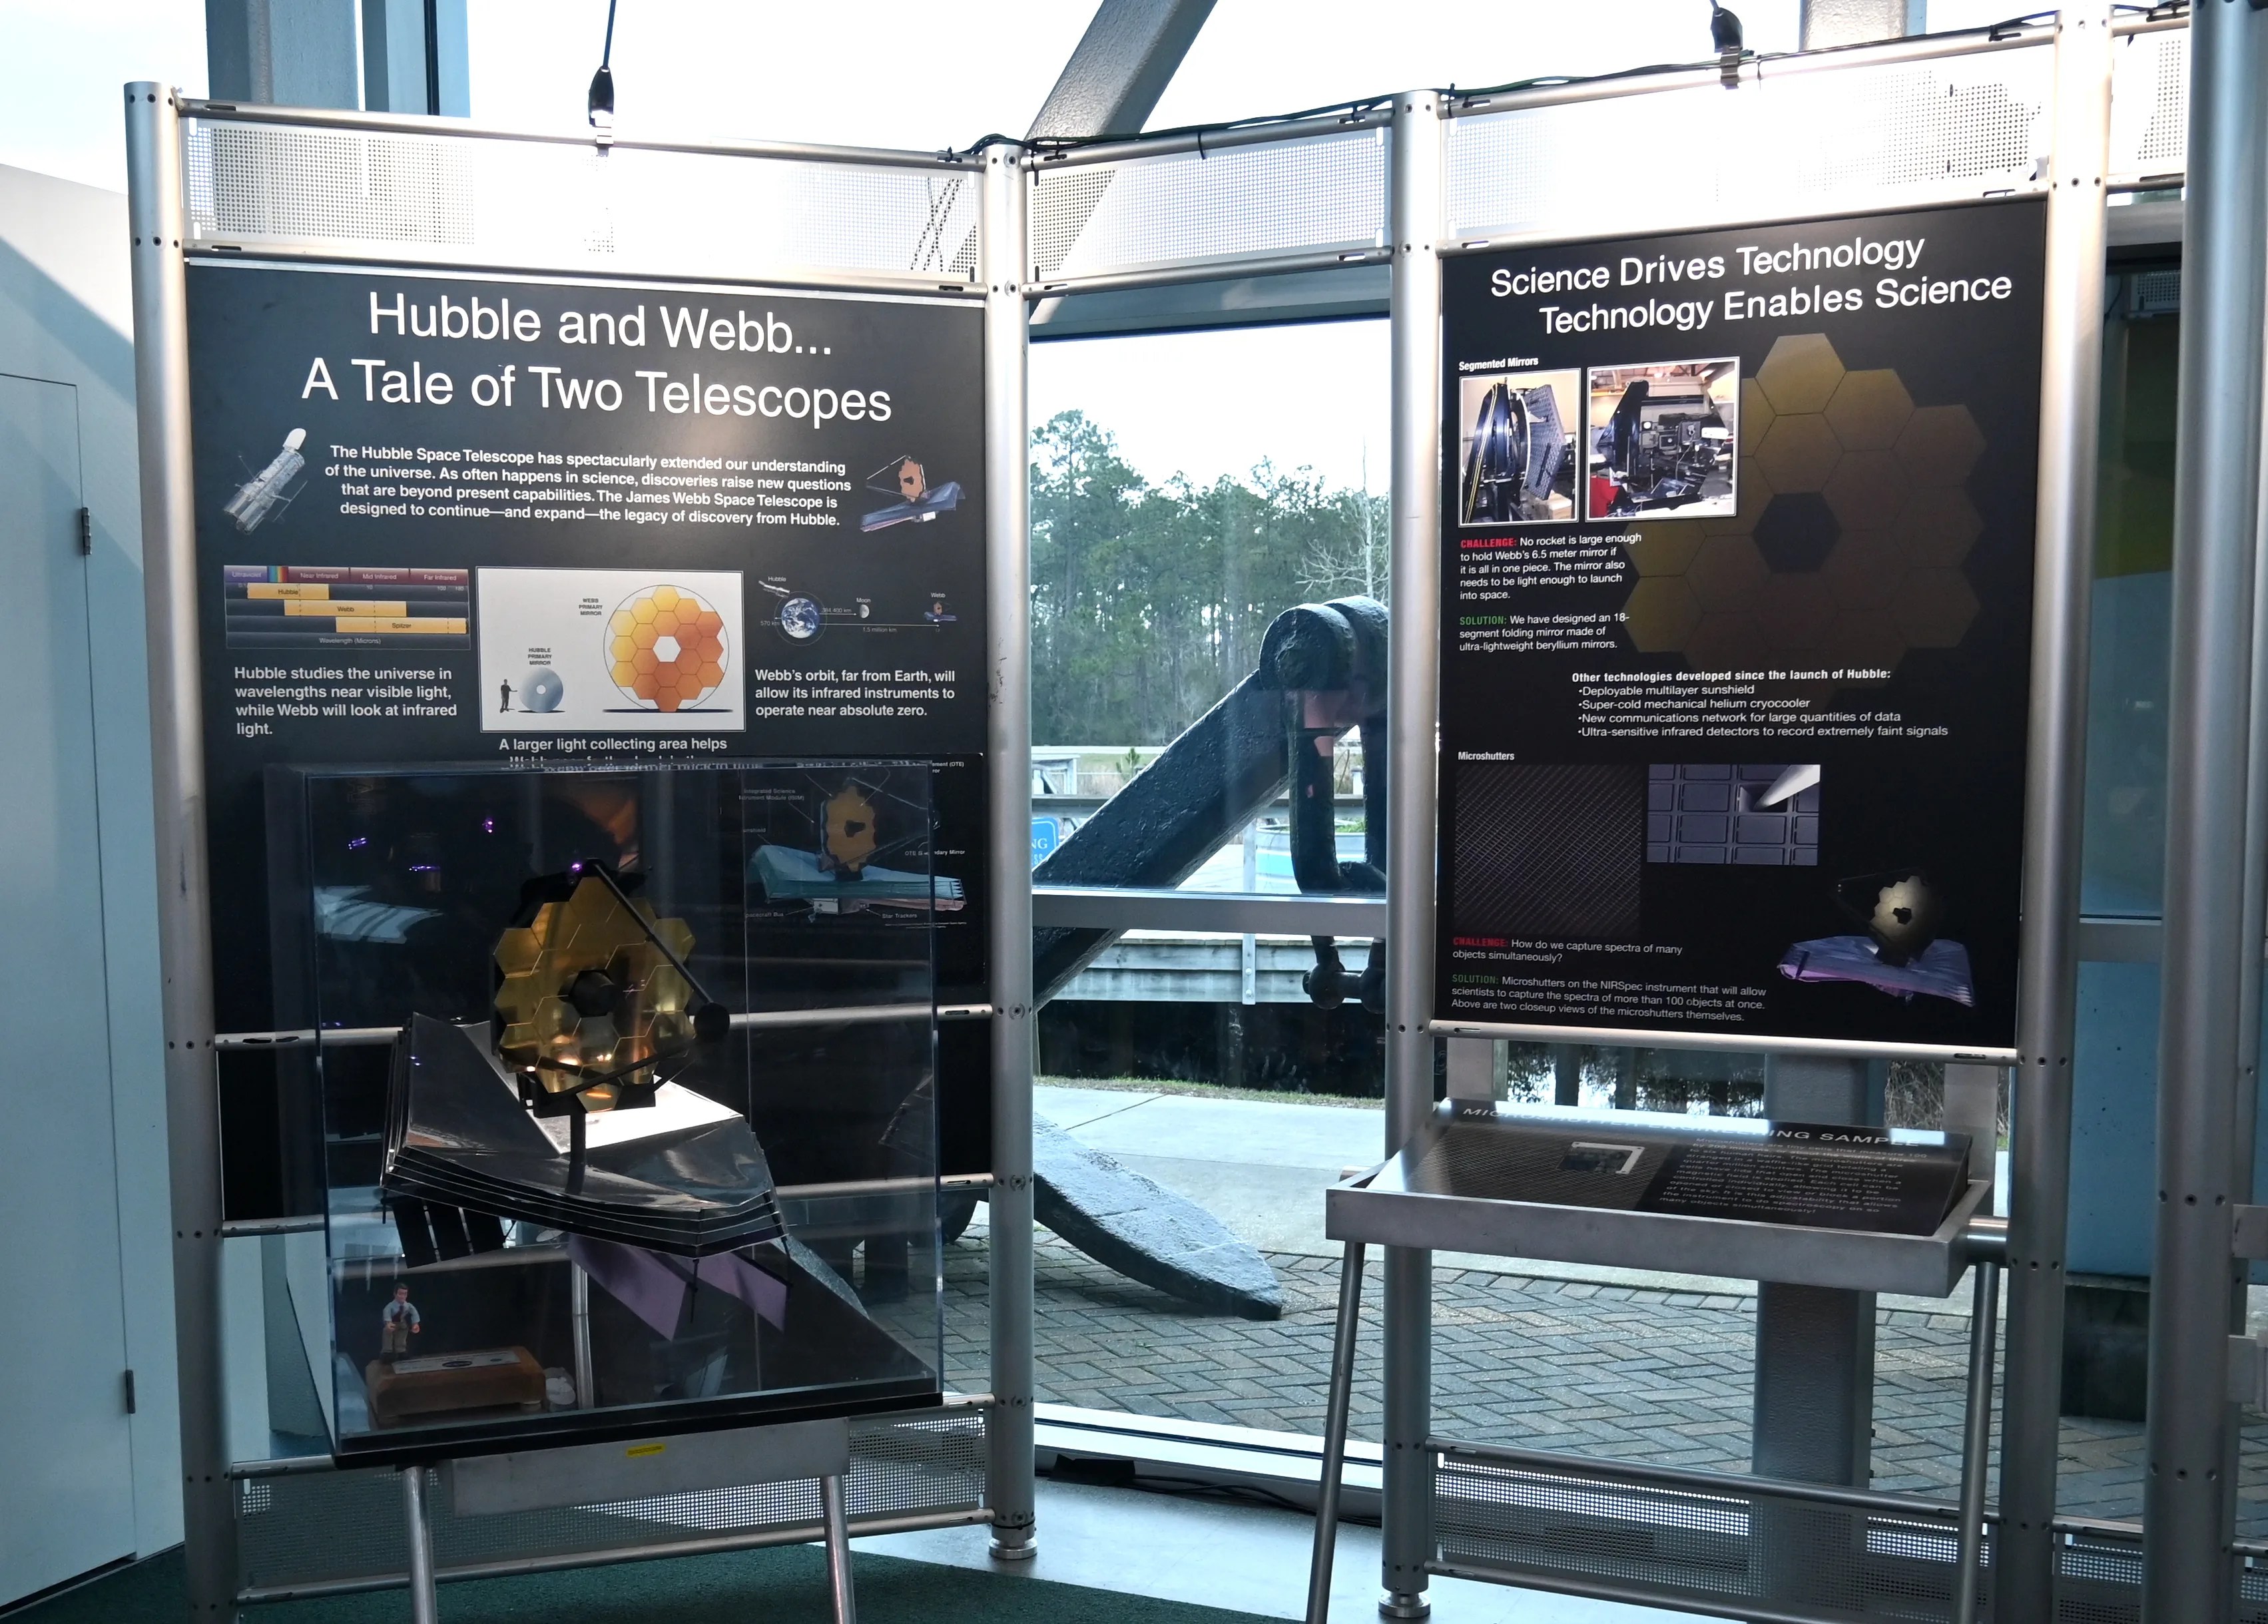 A scaled spacecraft model and explanatory panels on display describing the James Webb Space Telescope